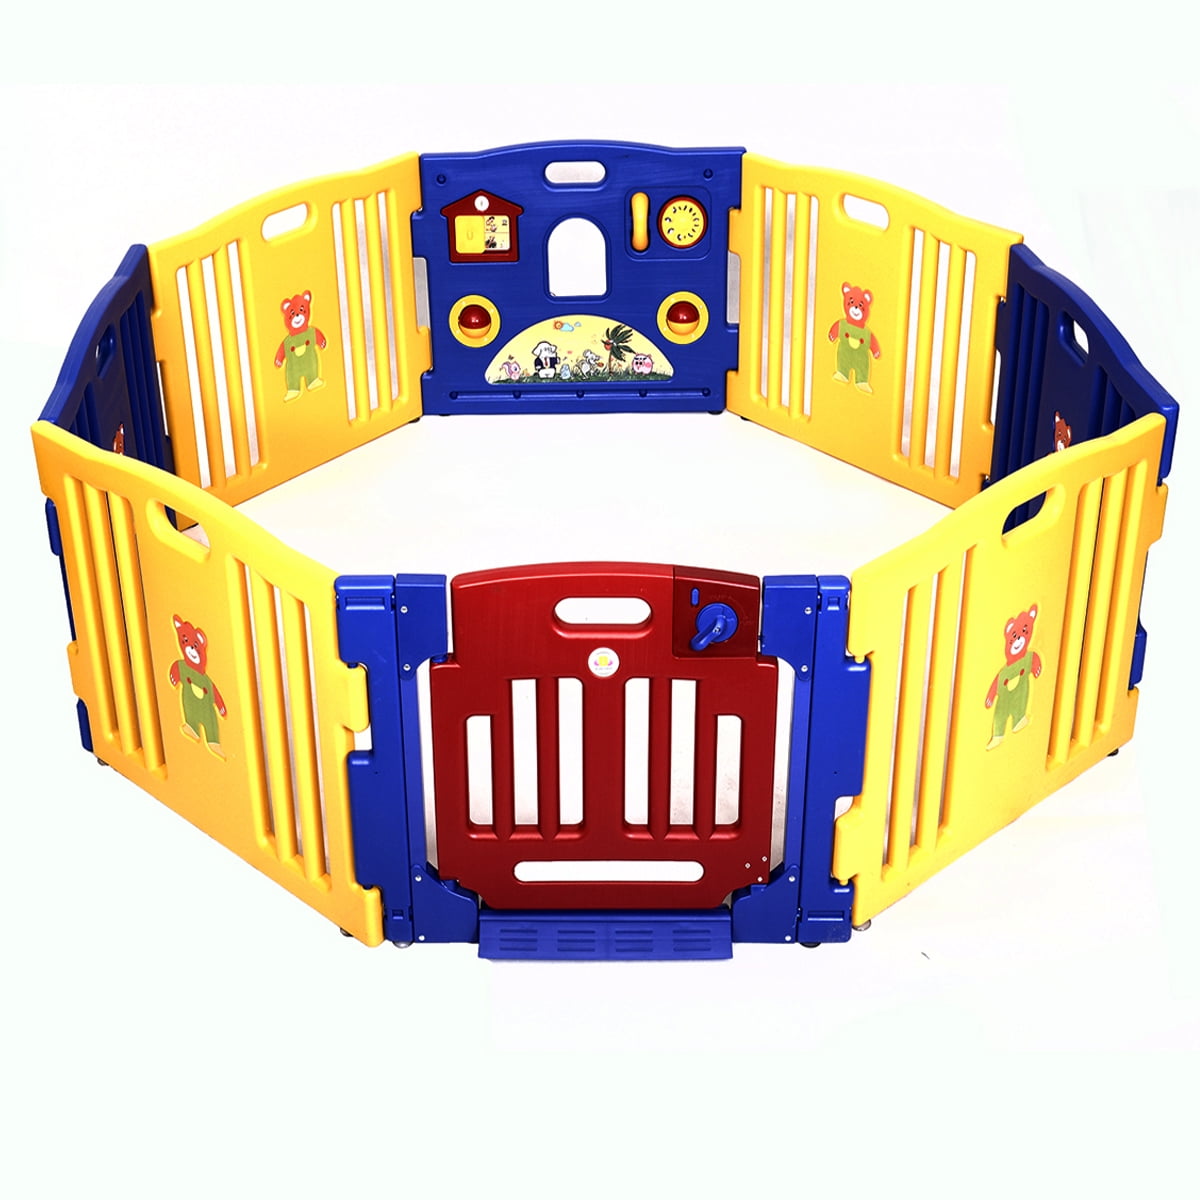 Baby Playpen Kids 8 Panel Safety Play Center Yard Home Indoor Outdoor Pen Fence 